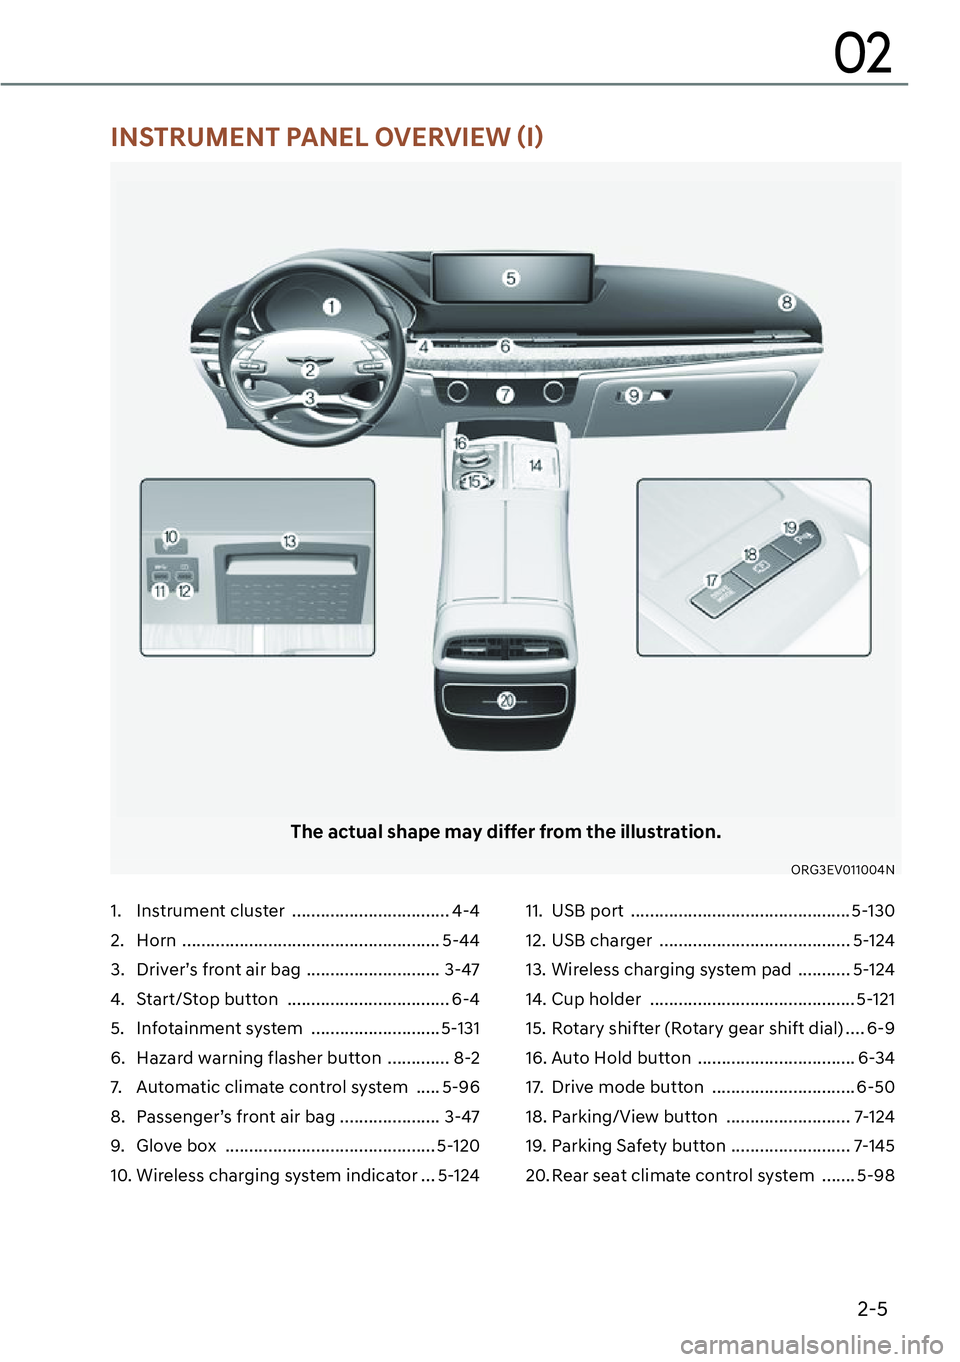 GENESIS G80 2023  Owners Manual 2-5
02
1. Instrument cluster  ................................. 4-4
2. Horn  ...................................................... 5-44
3.  Driver’s front air bag  ............................ 3-47